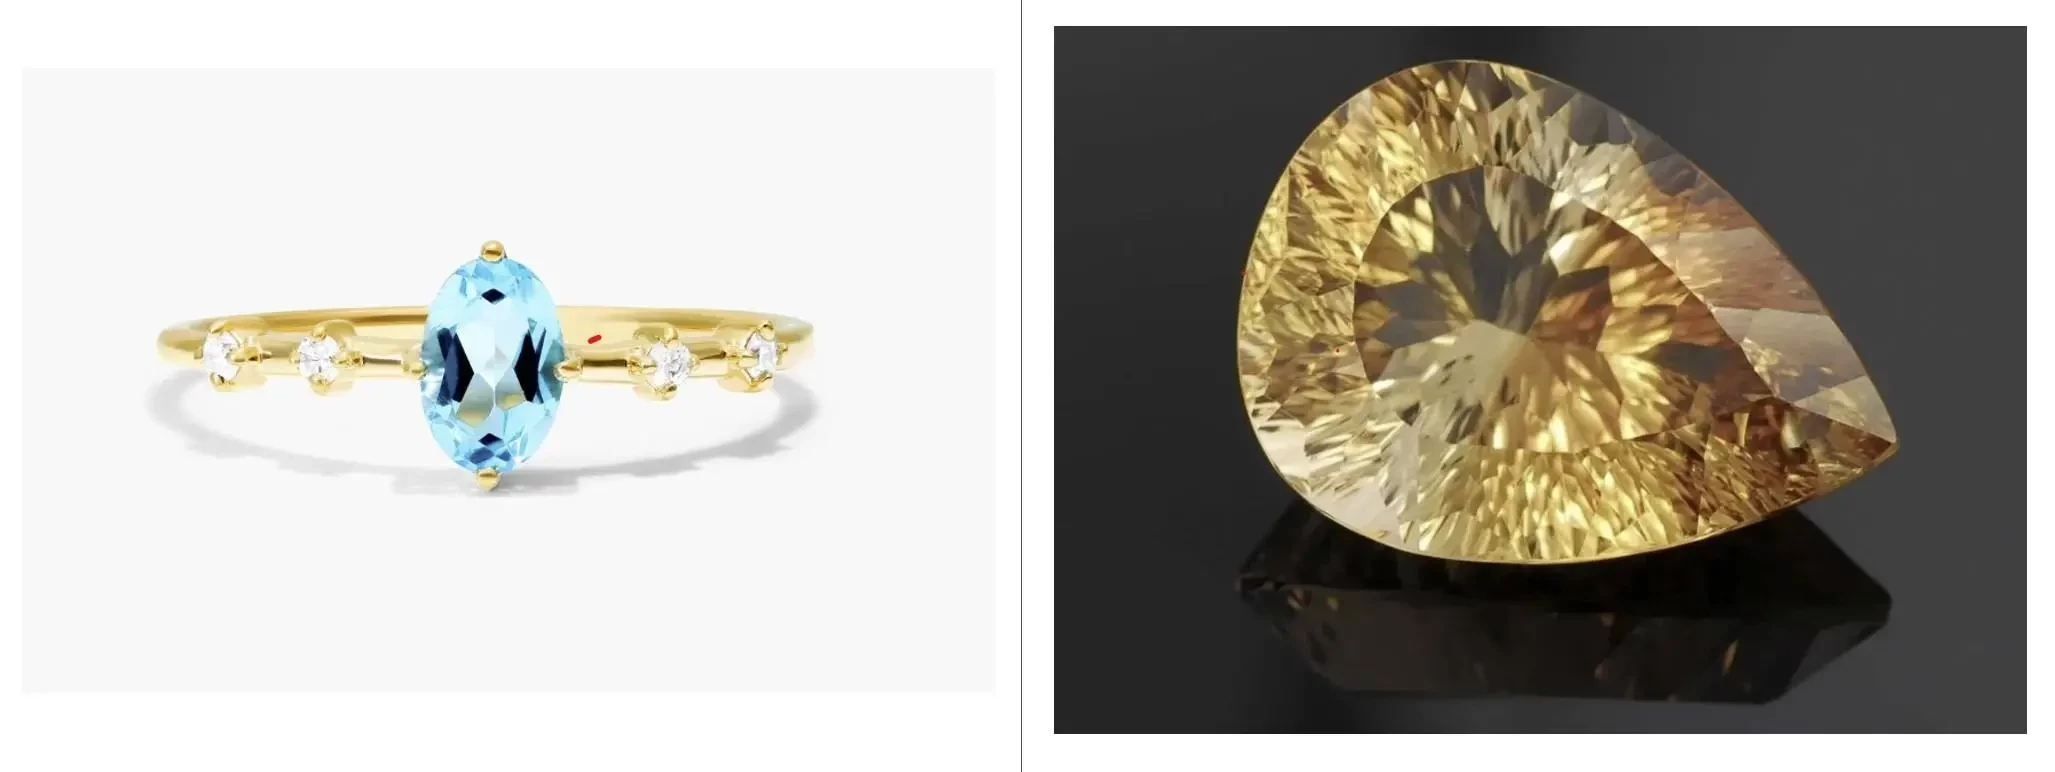 Citrine vs. Topaz Differences: Contrasts and Similarities